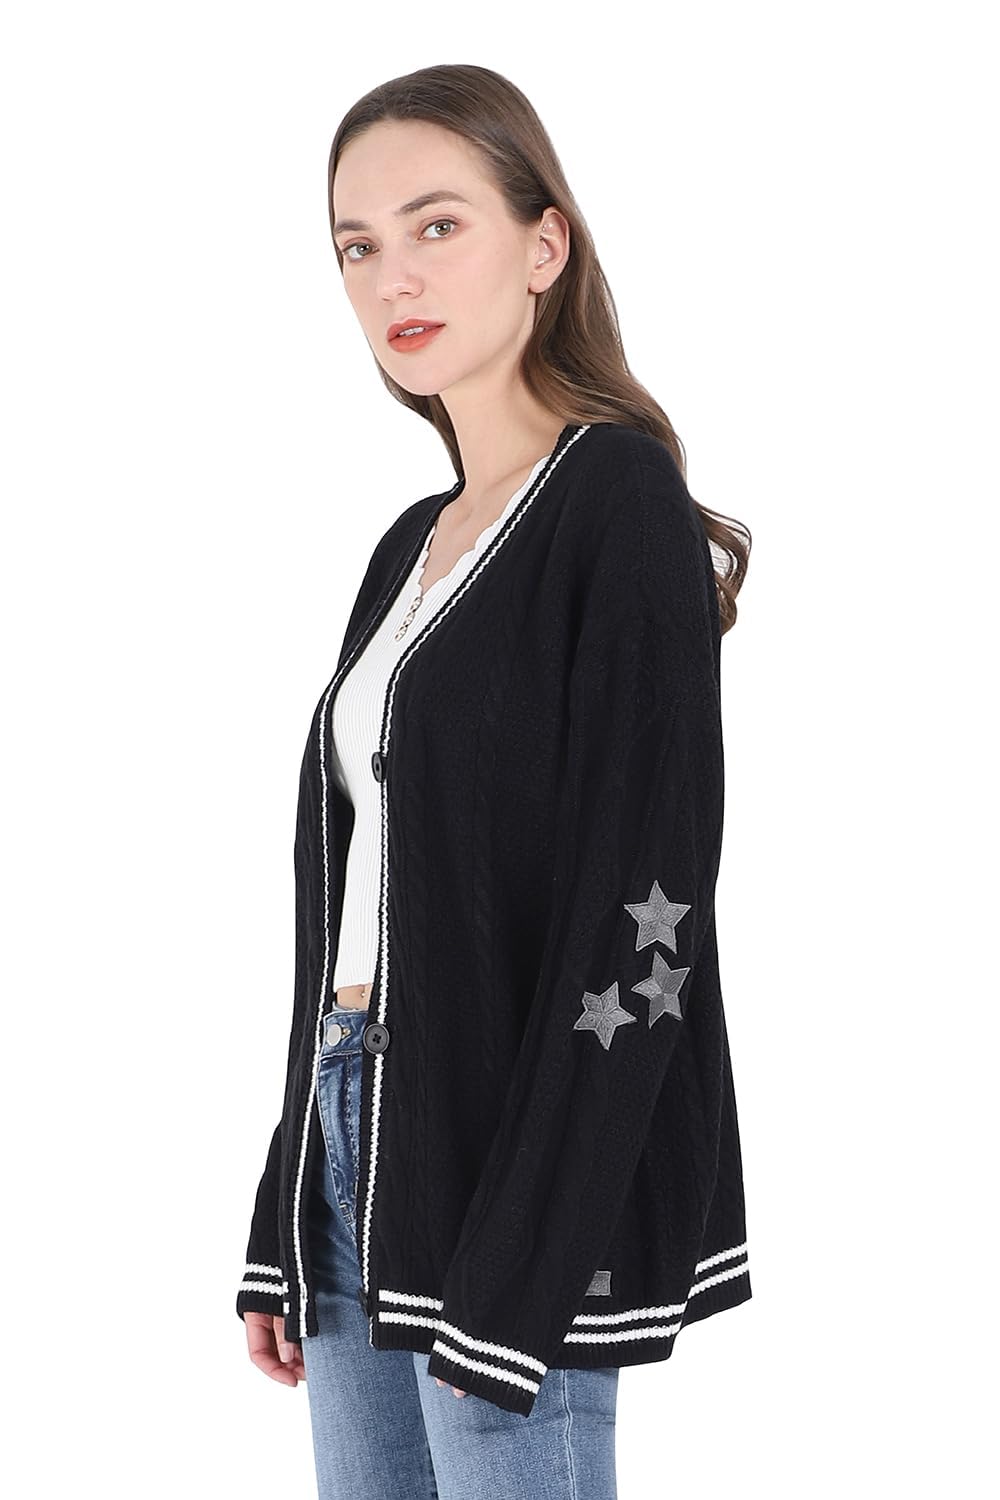 Chouyatou Women's Open Front Stars Embroideried Cable Knit Cardigans Button Down Sweater Outwear